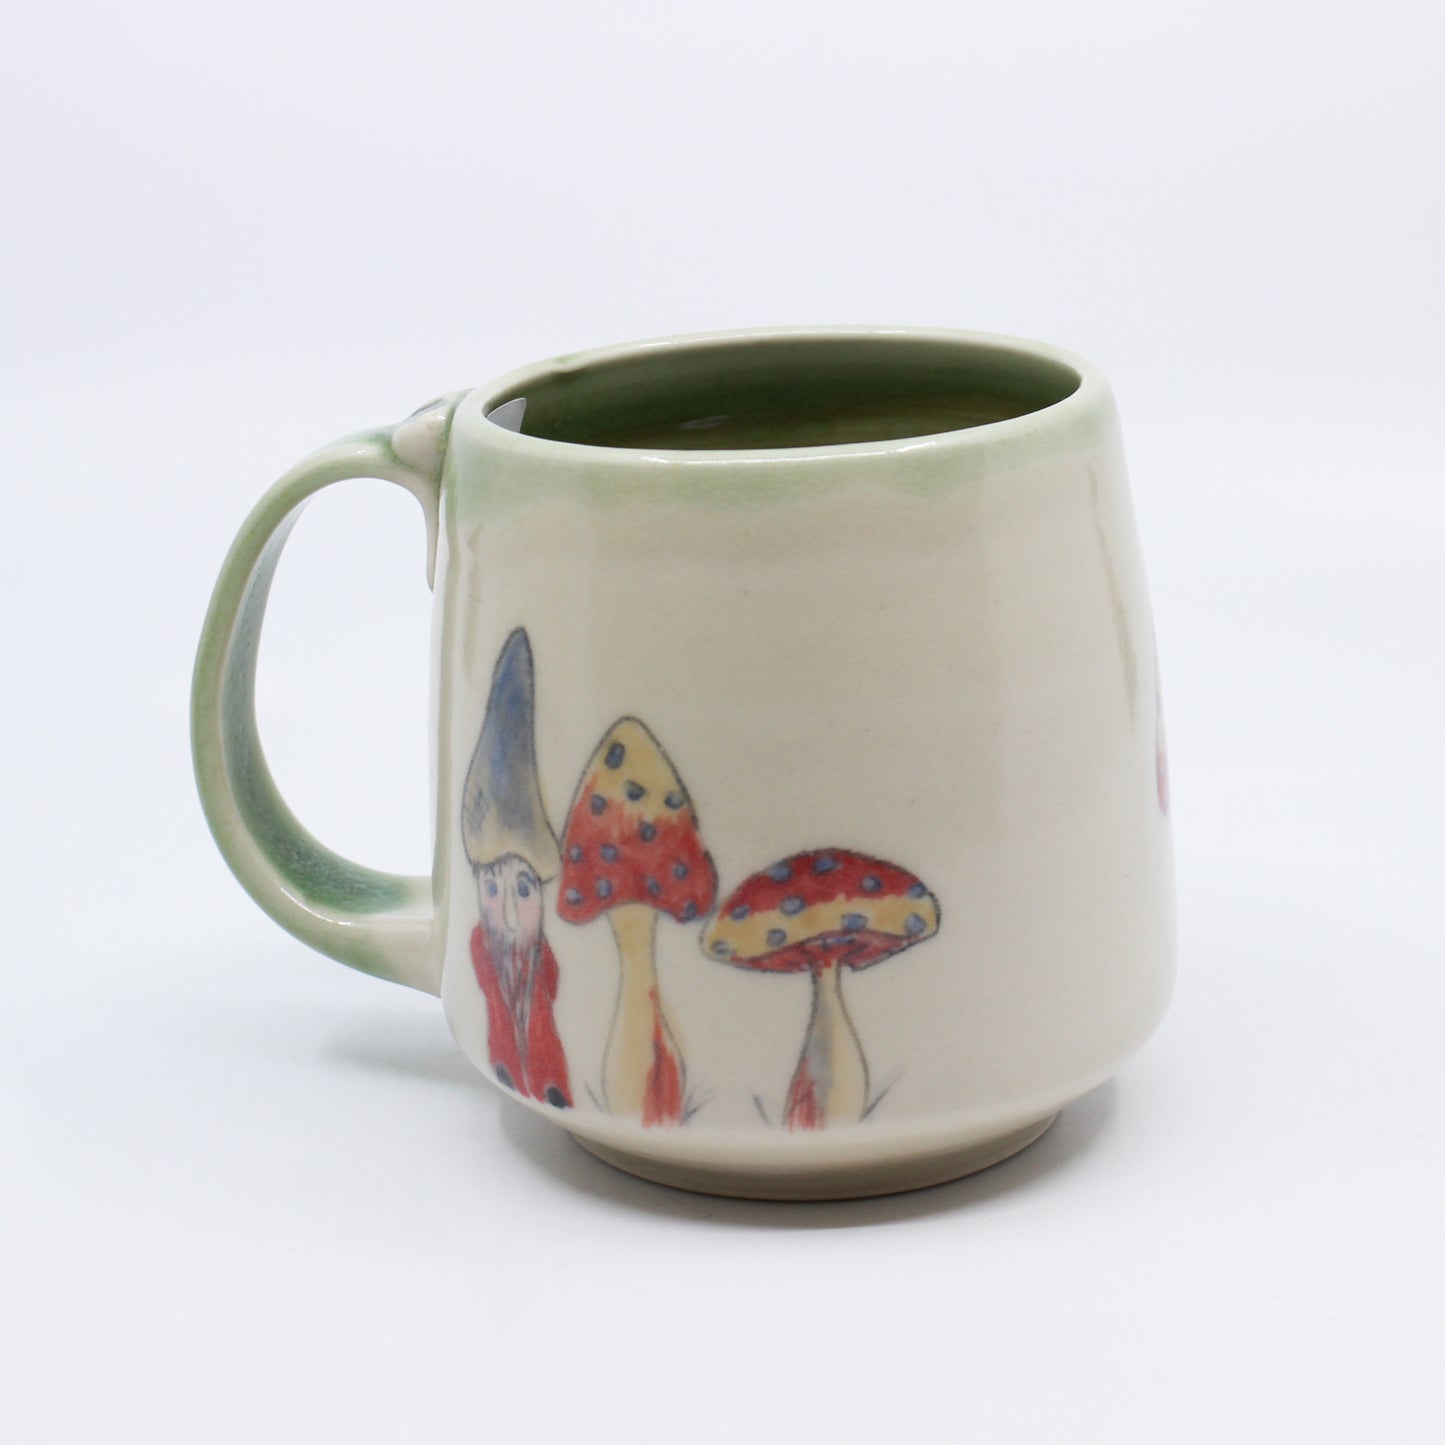 Hand-painted mushrooms on white and green mug with hiding gnome